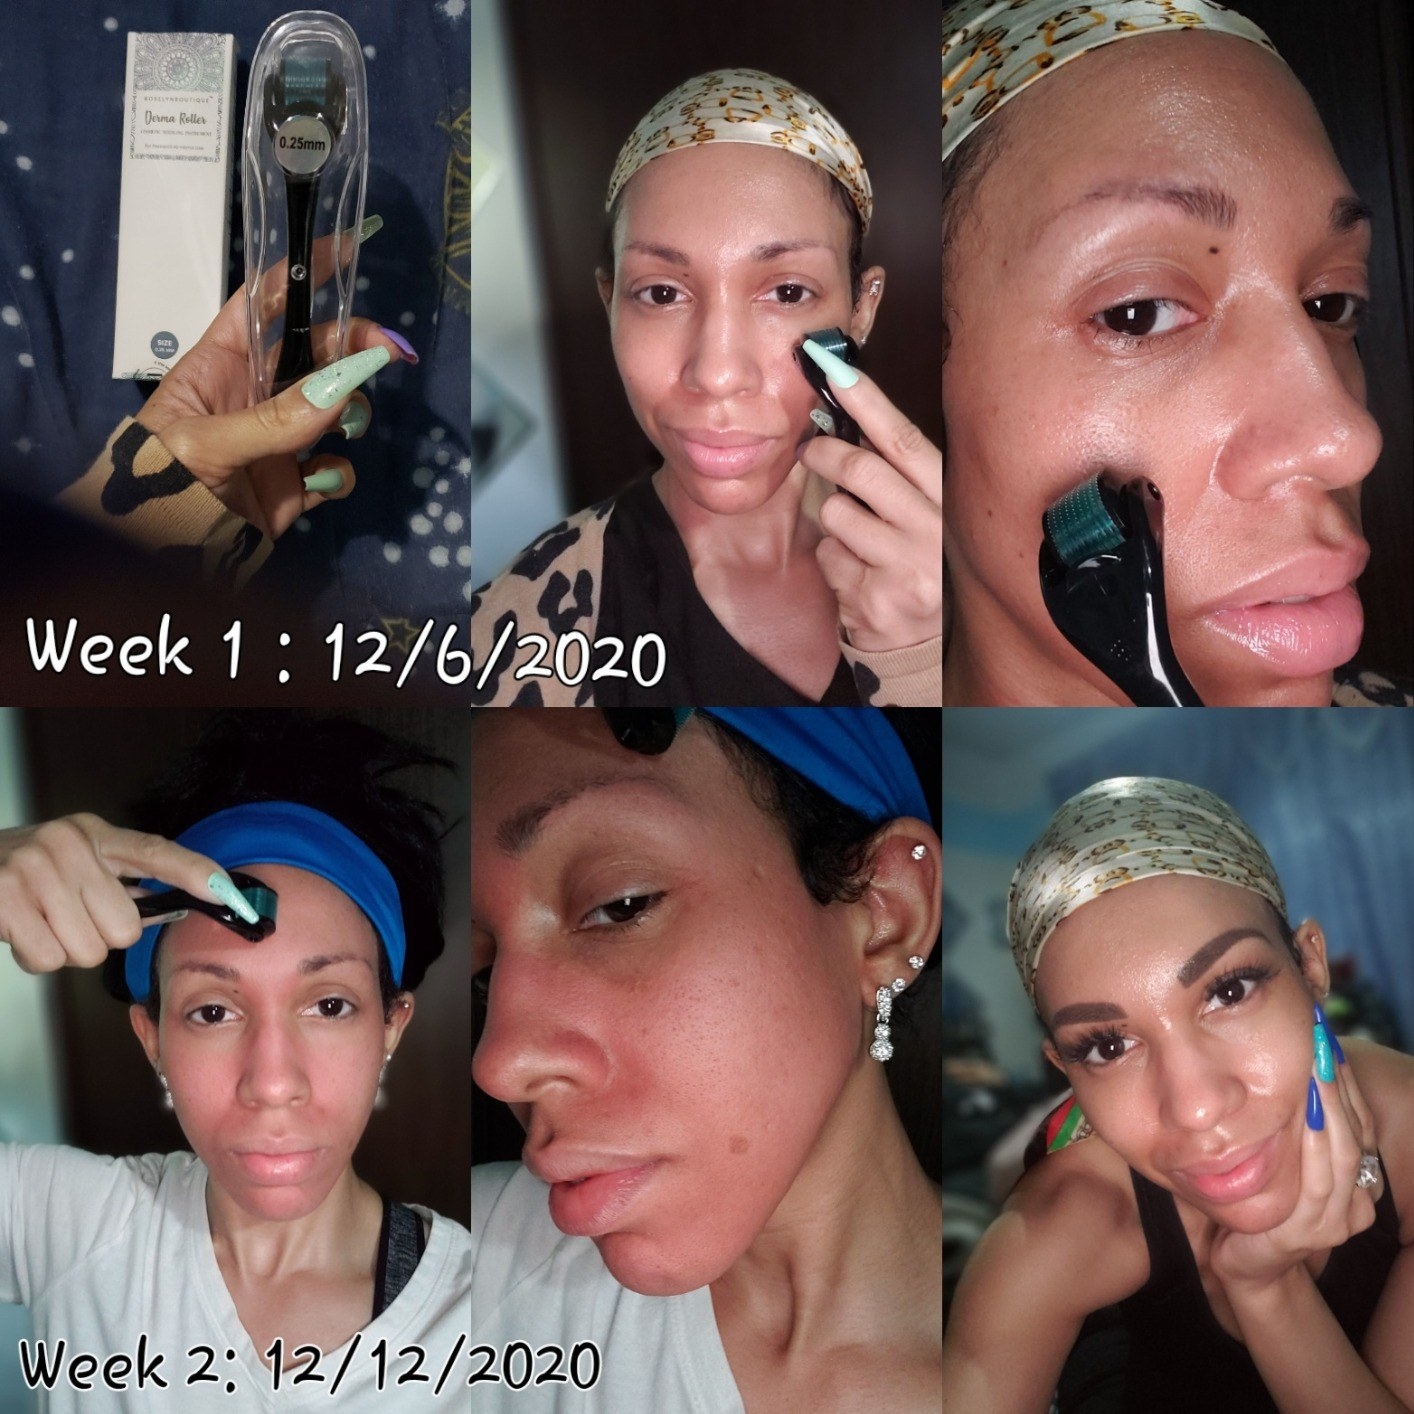 A reviewer demonstrating use of the derma-roller and progress pics over the course of two weeks, the end result being a smooth, dewy-looking face